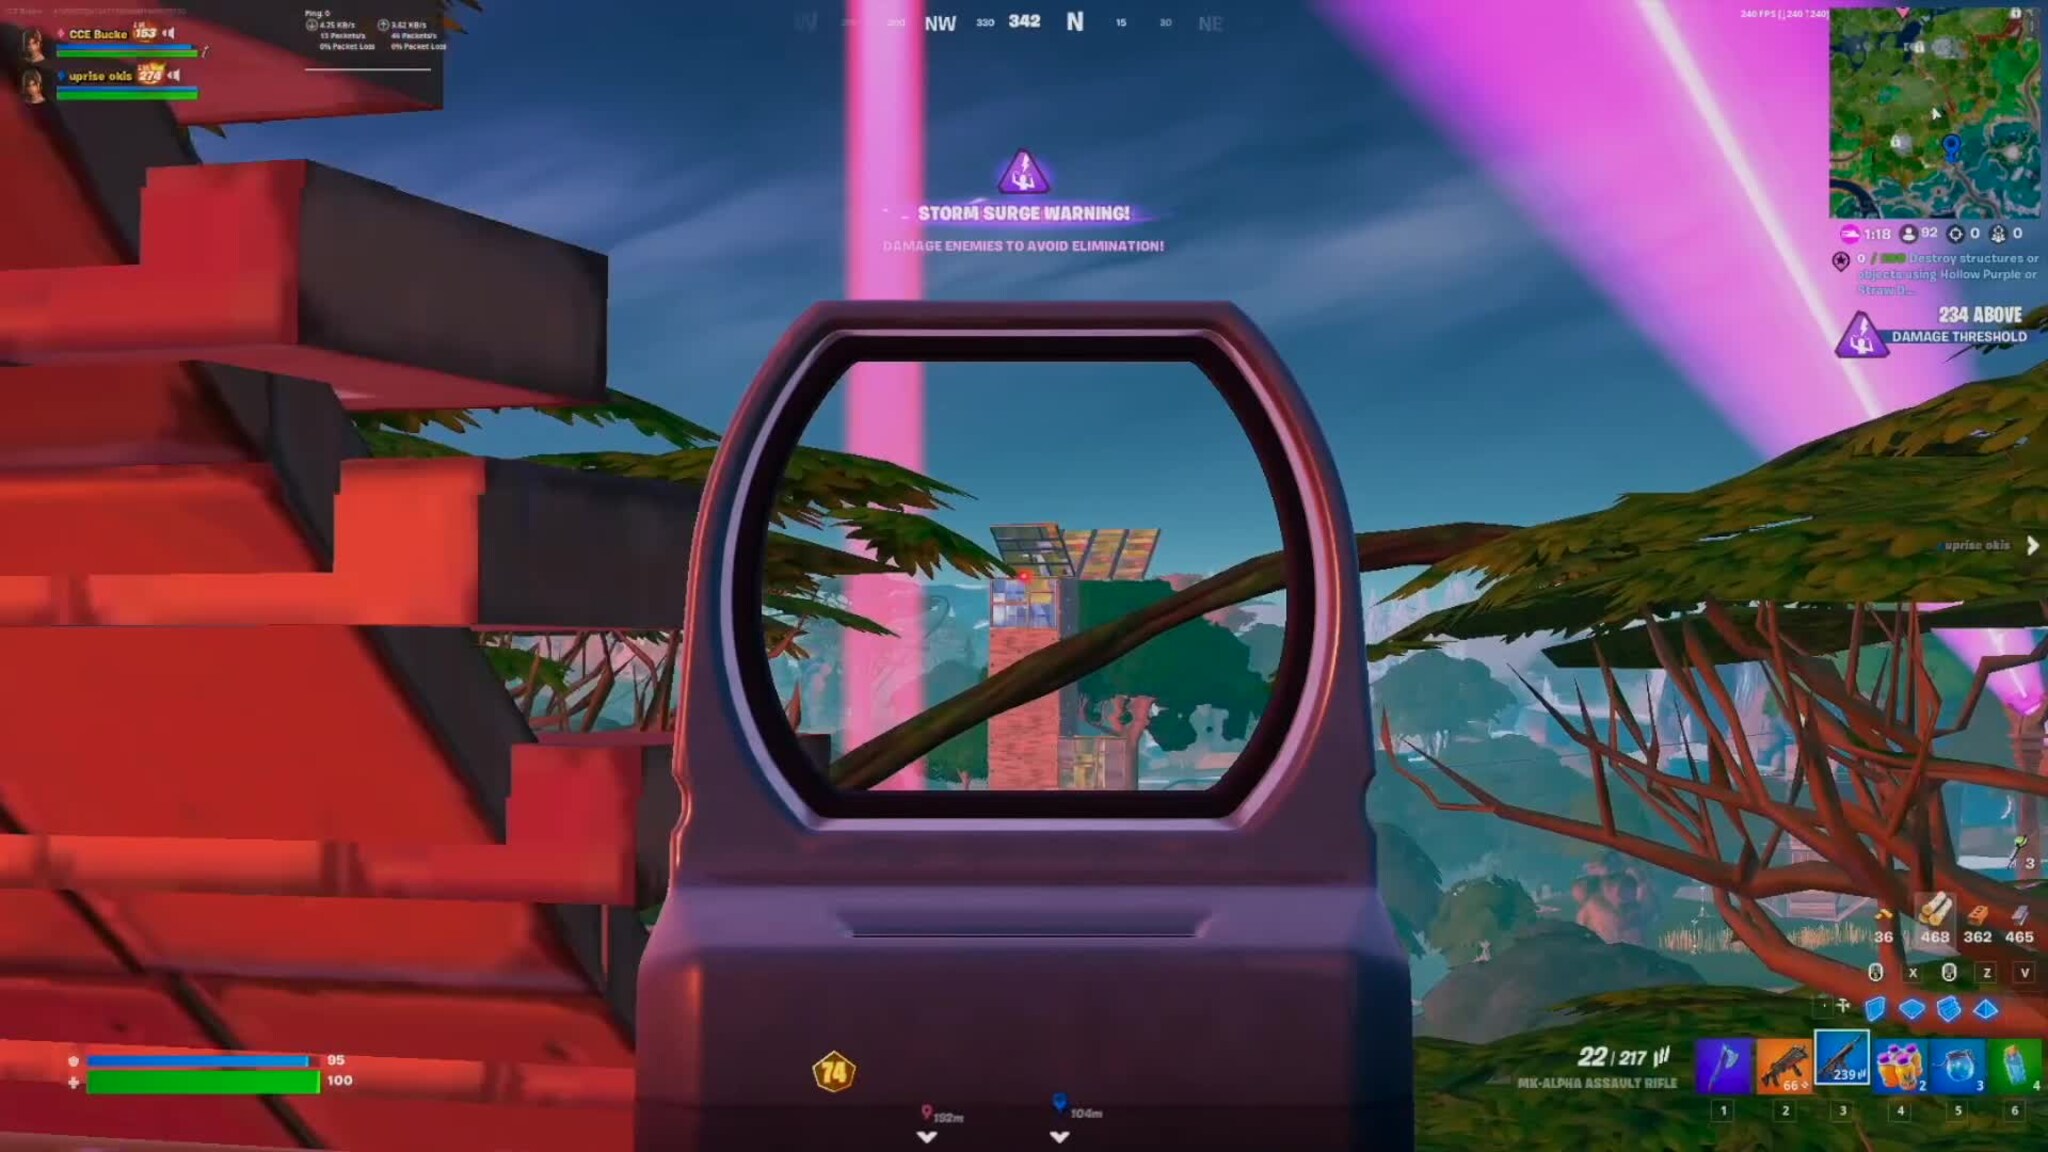 Ola trains “Fortnite” players: – Lots of questions